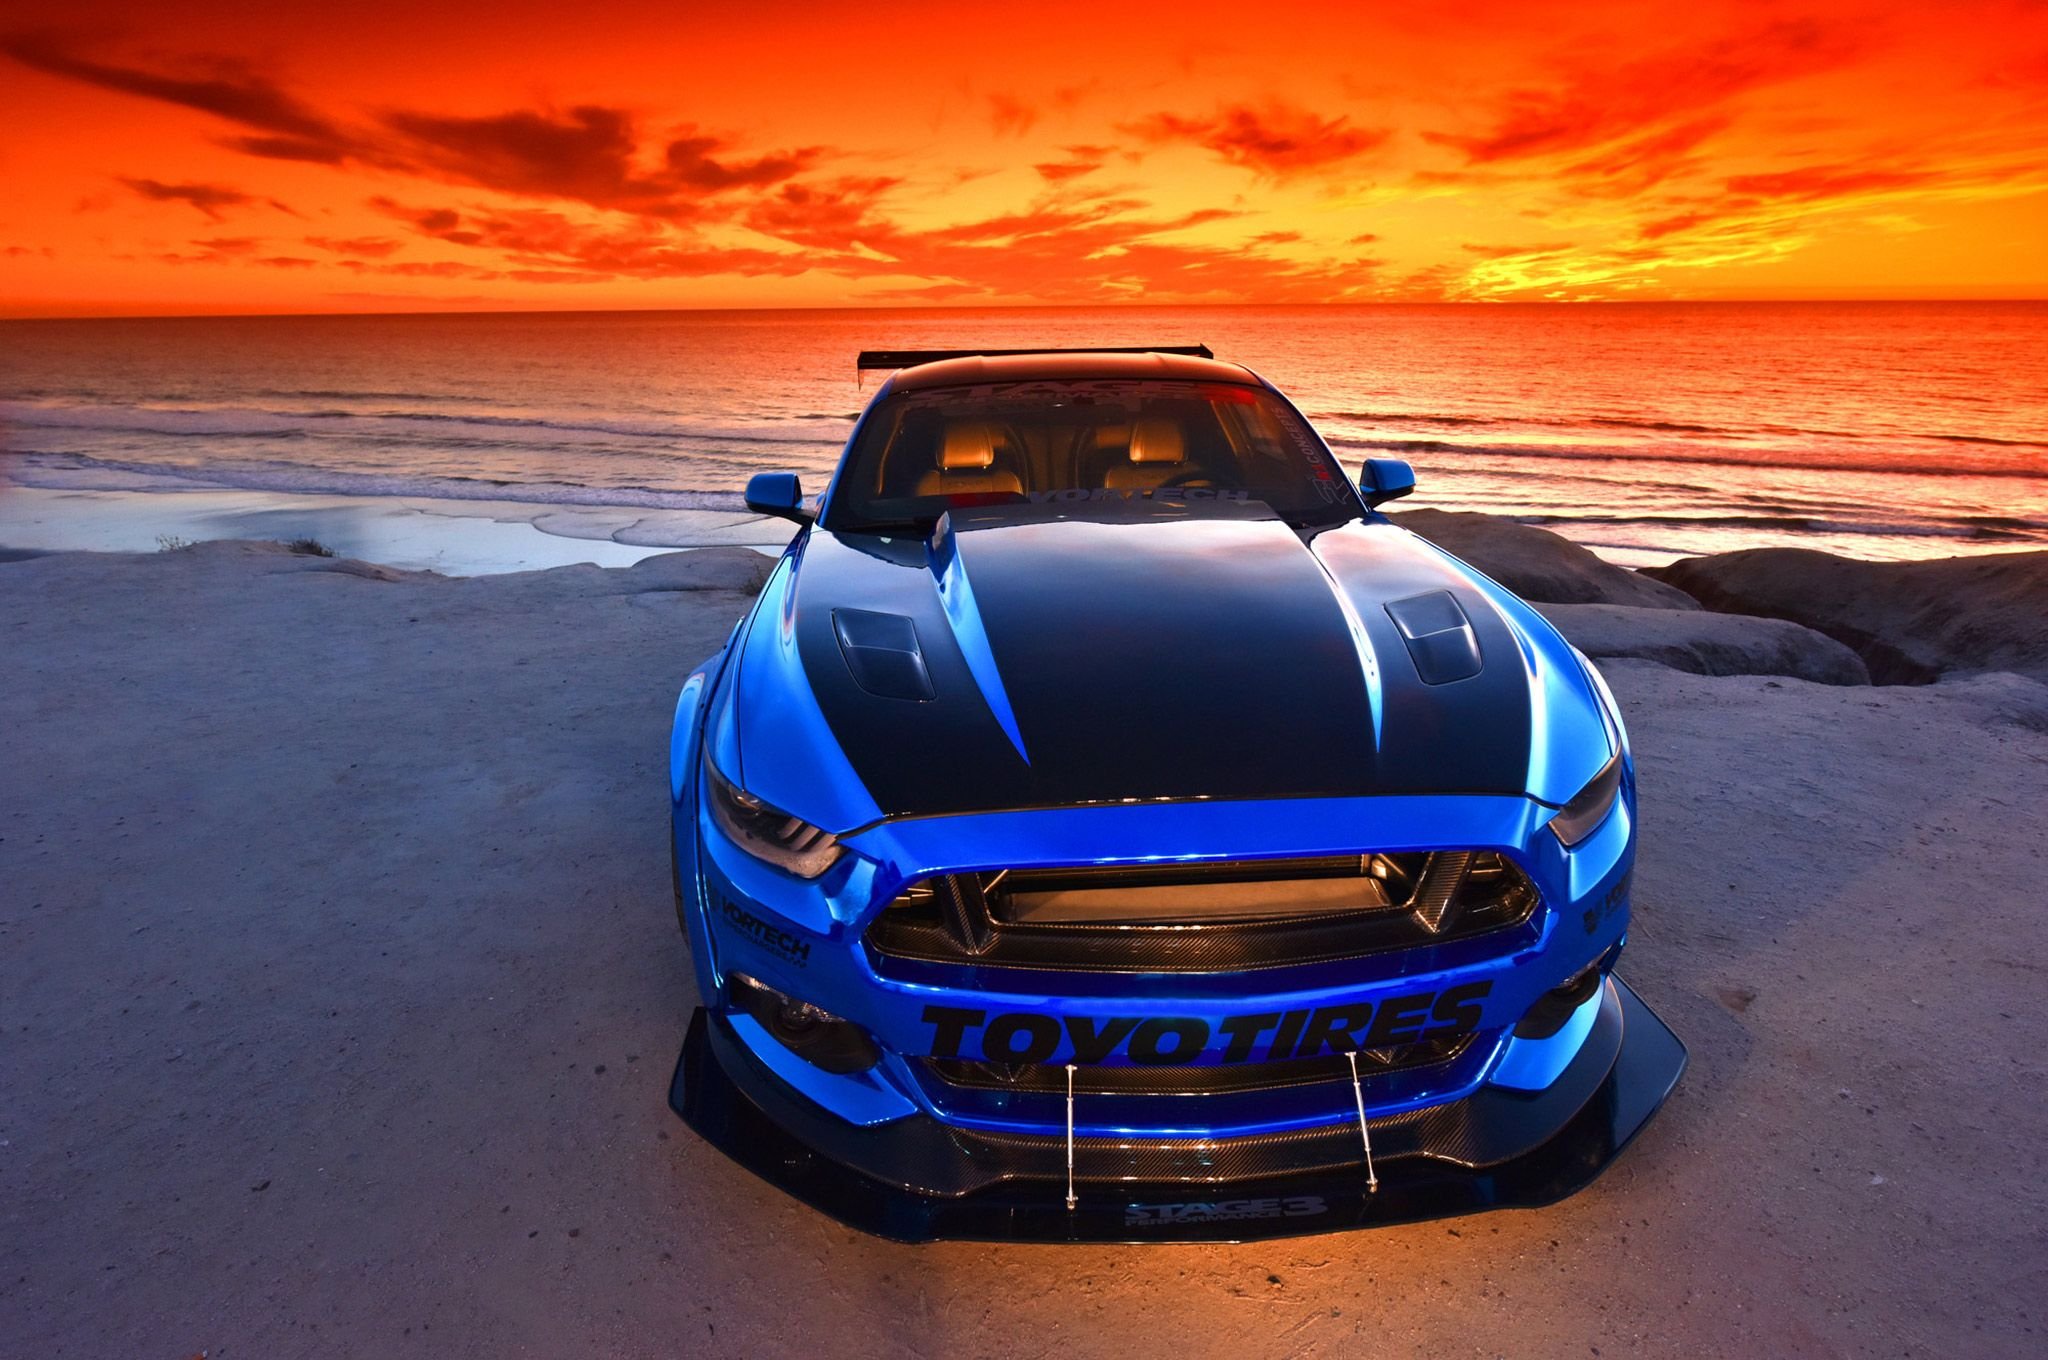 2015, S550, Ford, Mustang, Drift, Race, Racing, Muscle, Hot, Rod, Rods, Tuning, Muscle Wallpaper